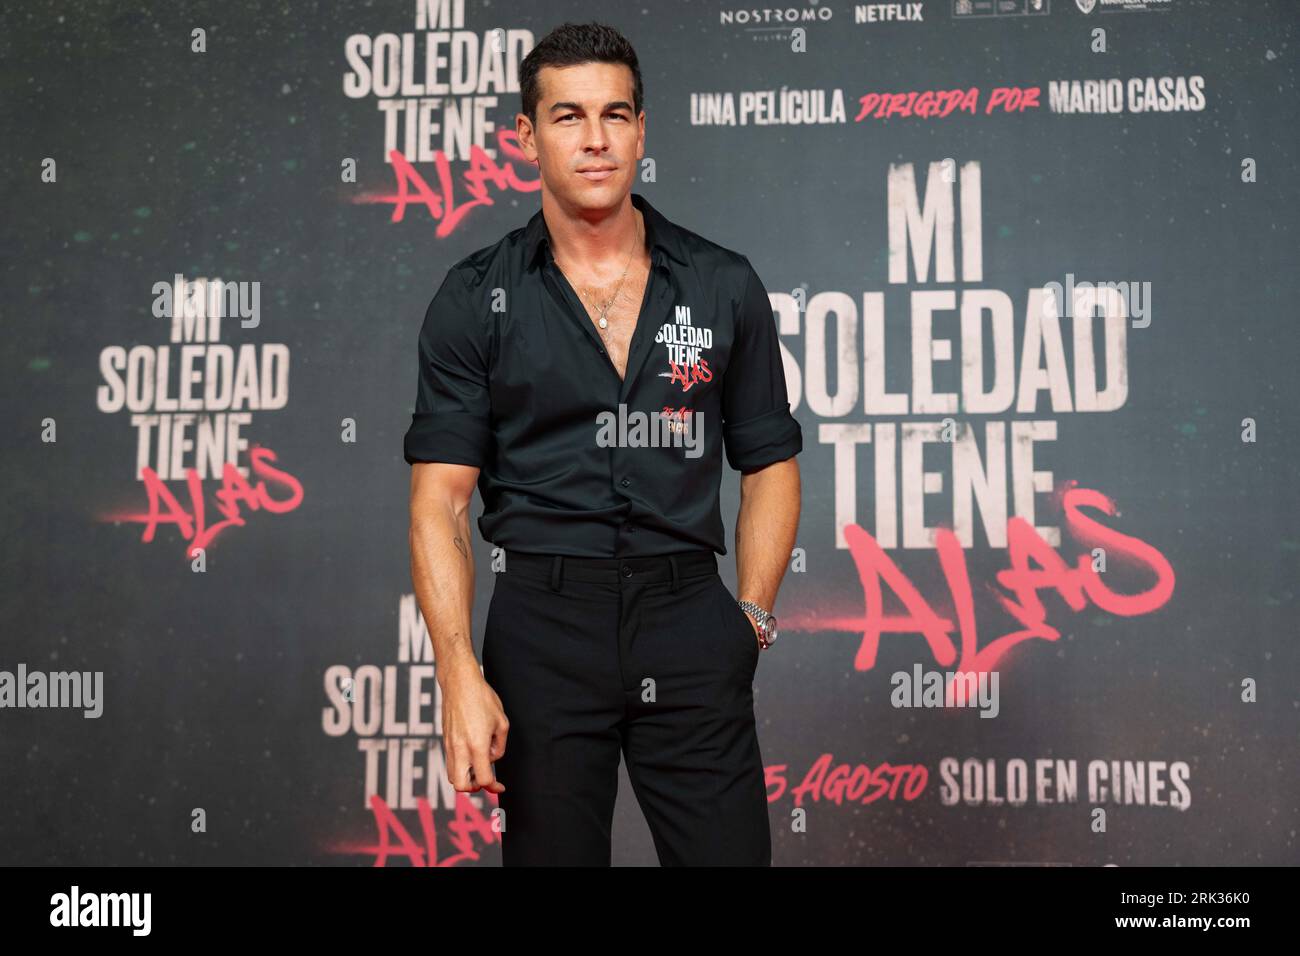 What Mario Casas Films and TV are on Netflix in America